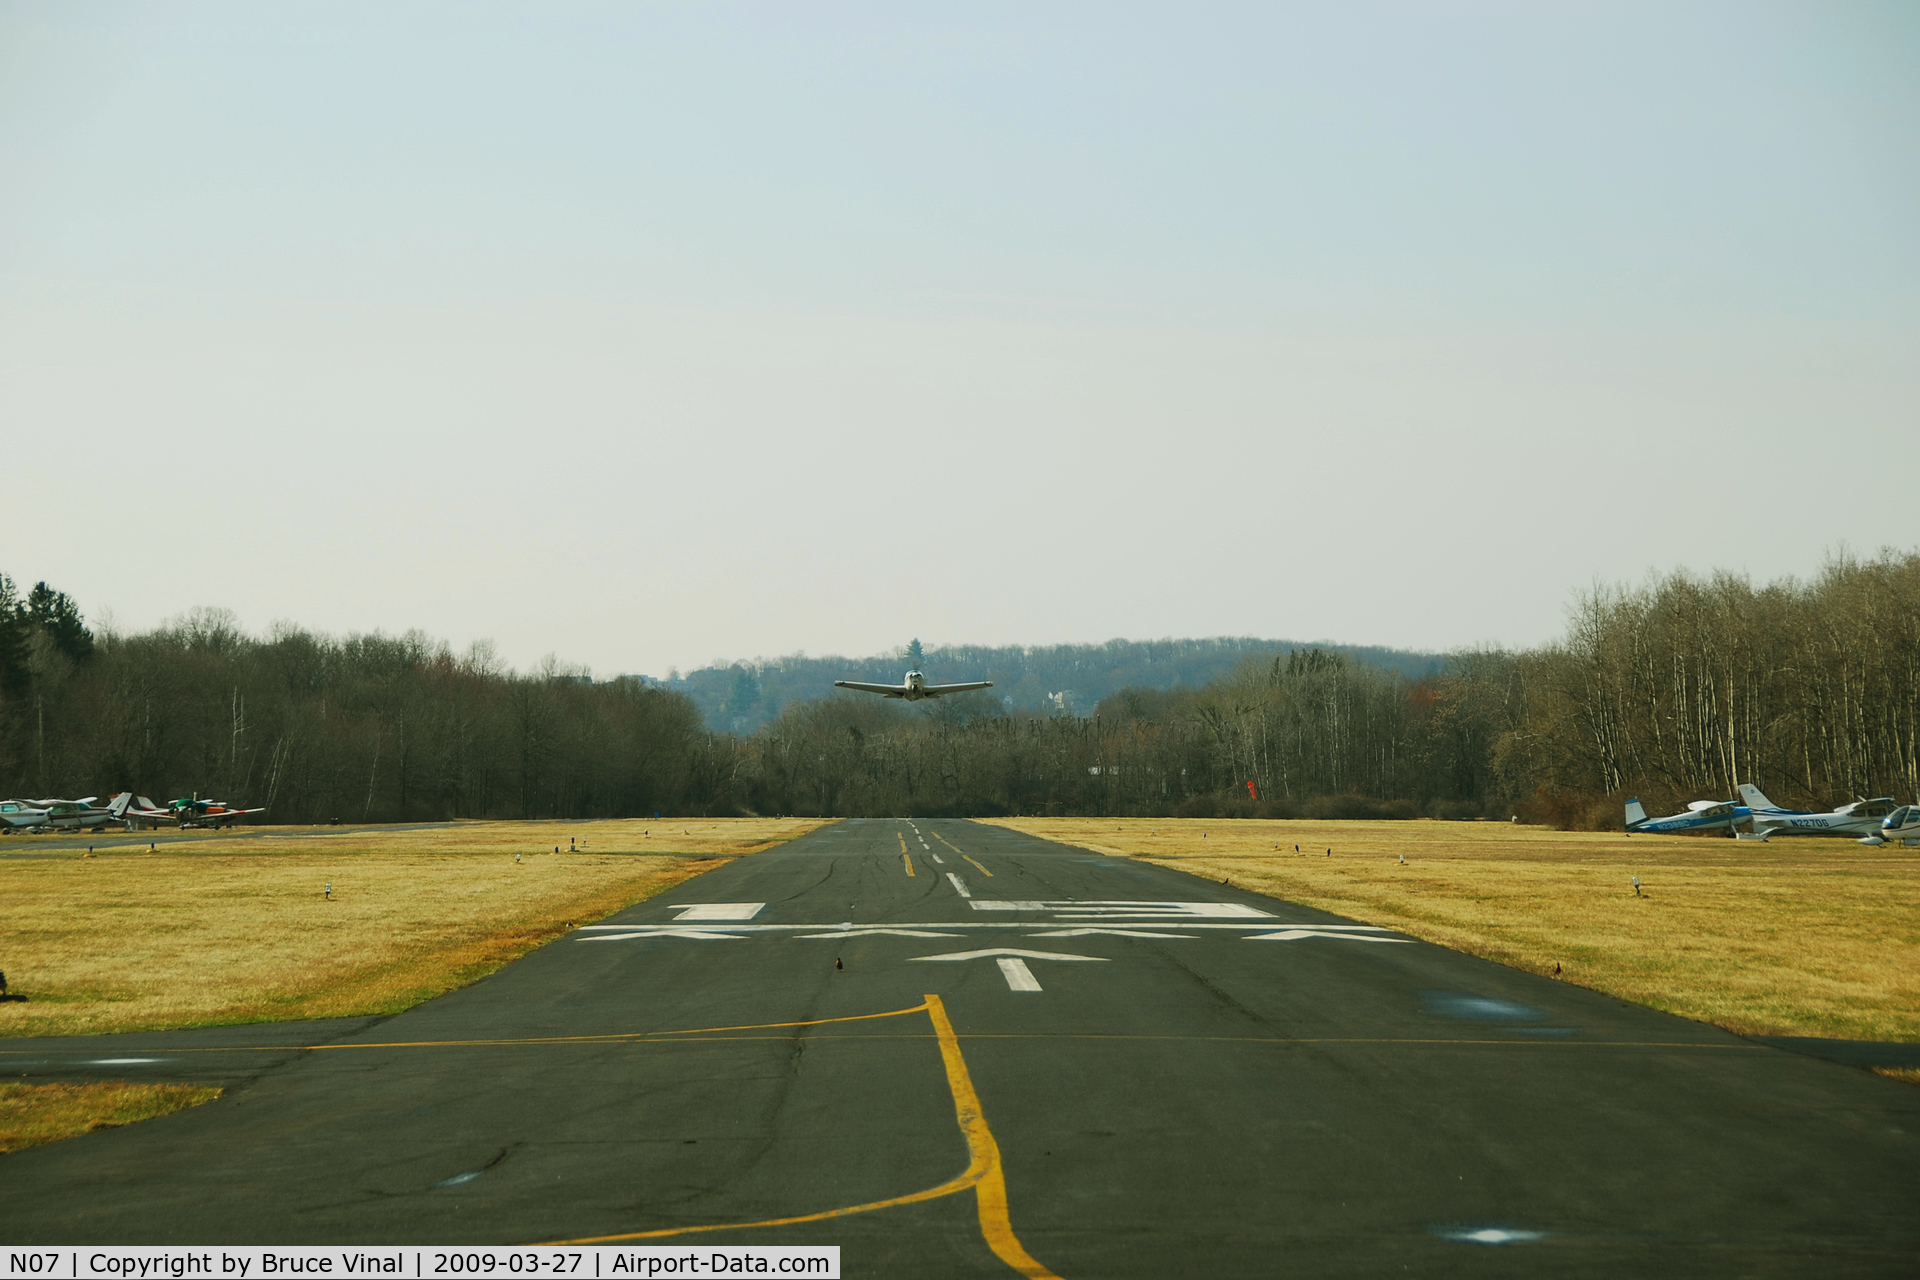 Lincoln Park Airport (N07) - N415JL Heads into the wind